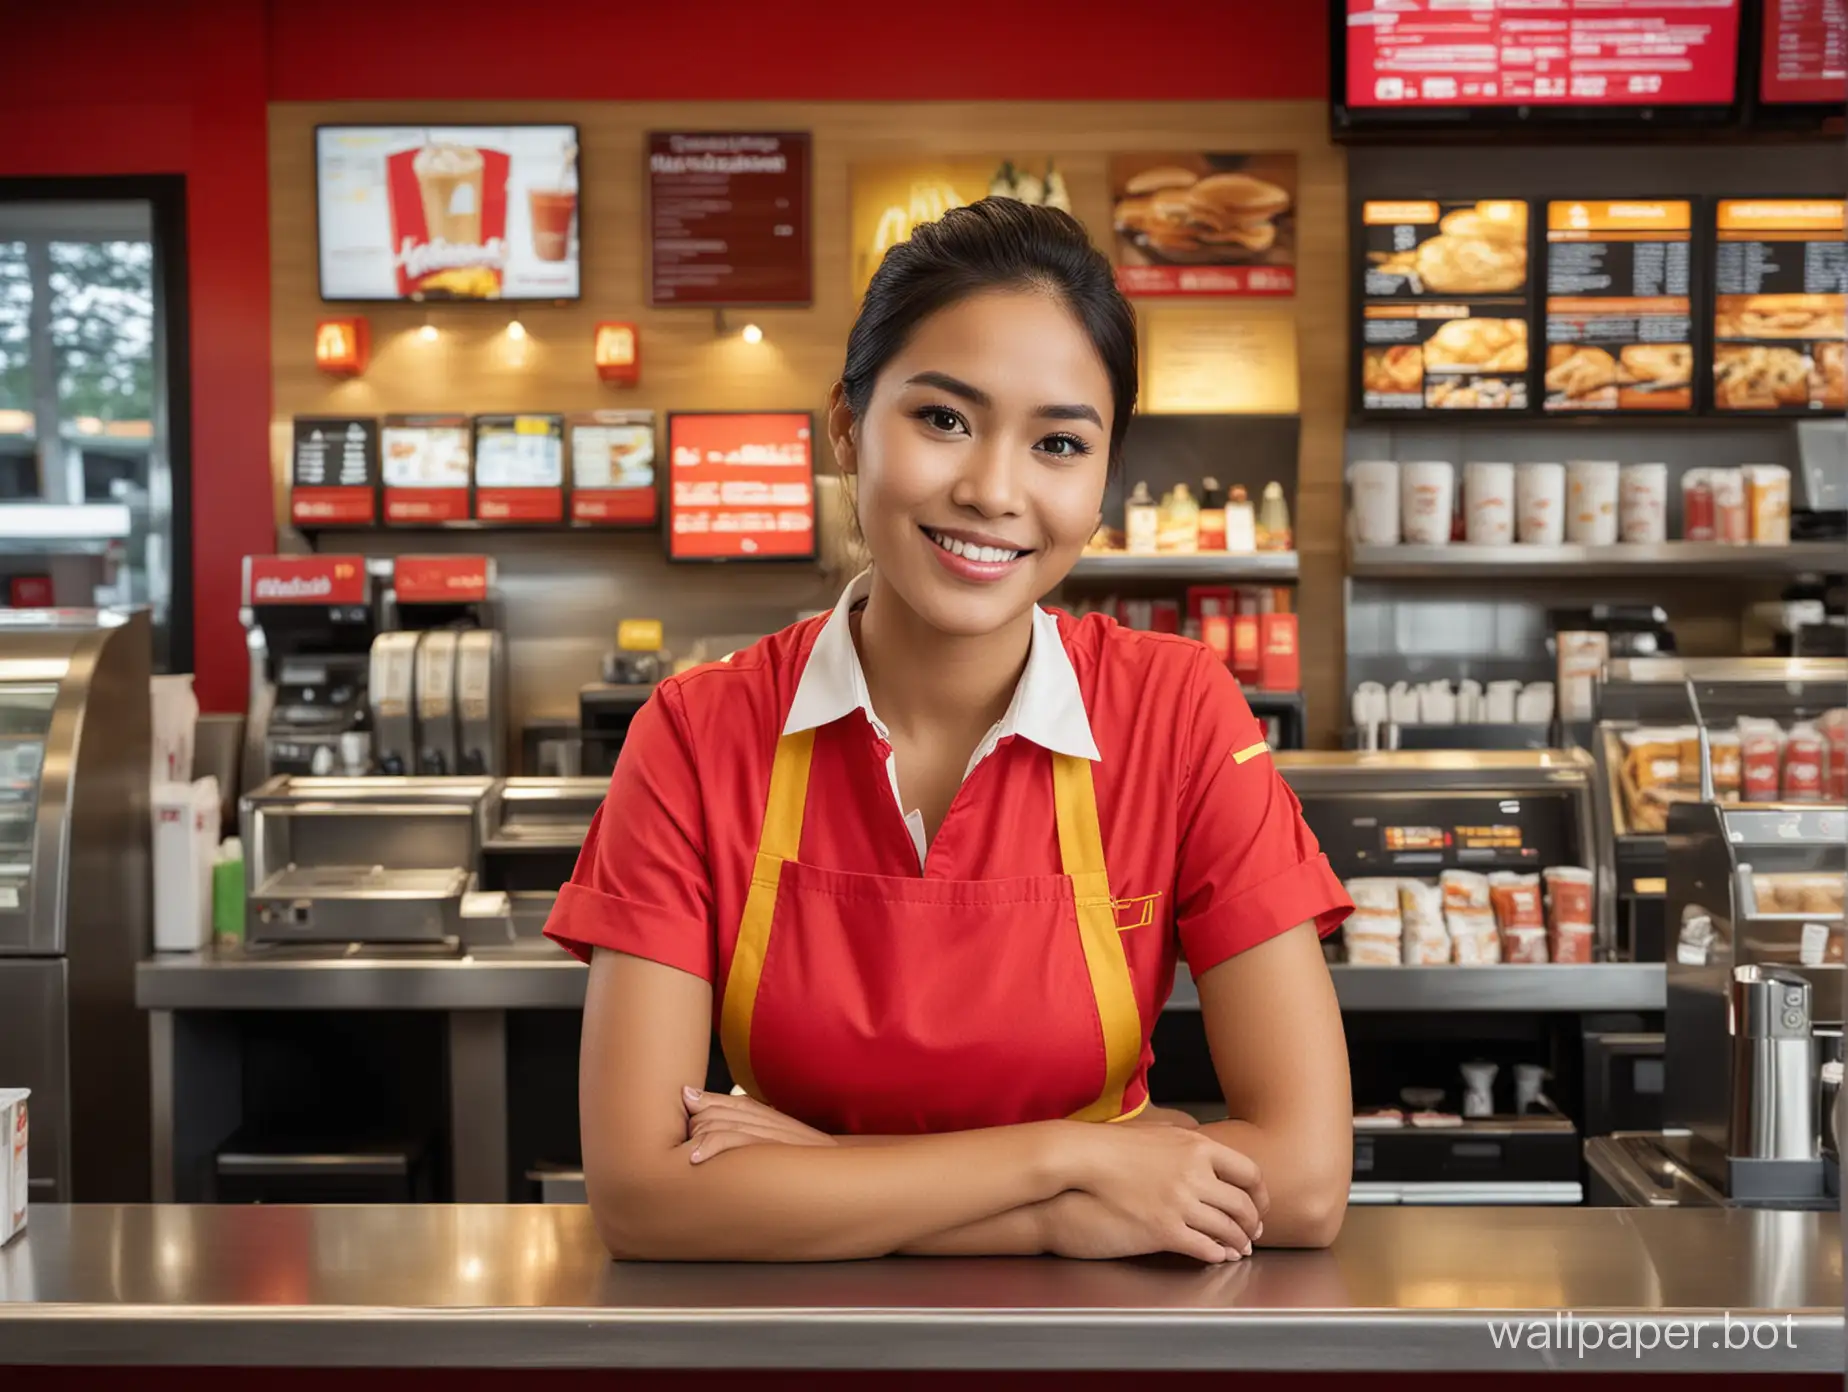 Indonesian-Female-Barista-in-Red-McDonalds-Apron-Operating-POS-System-with-Engaging-Smile